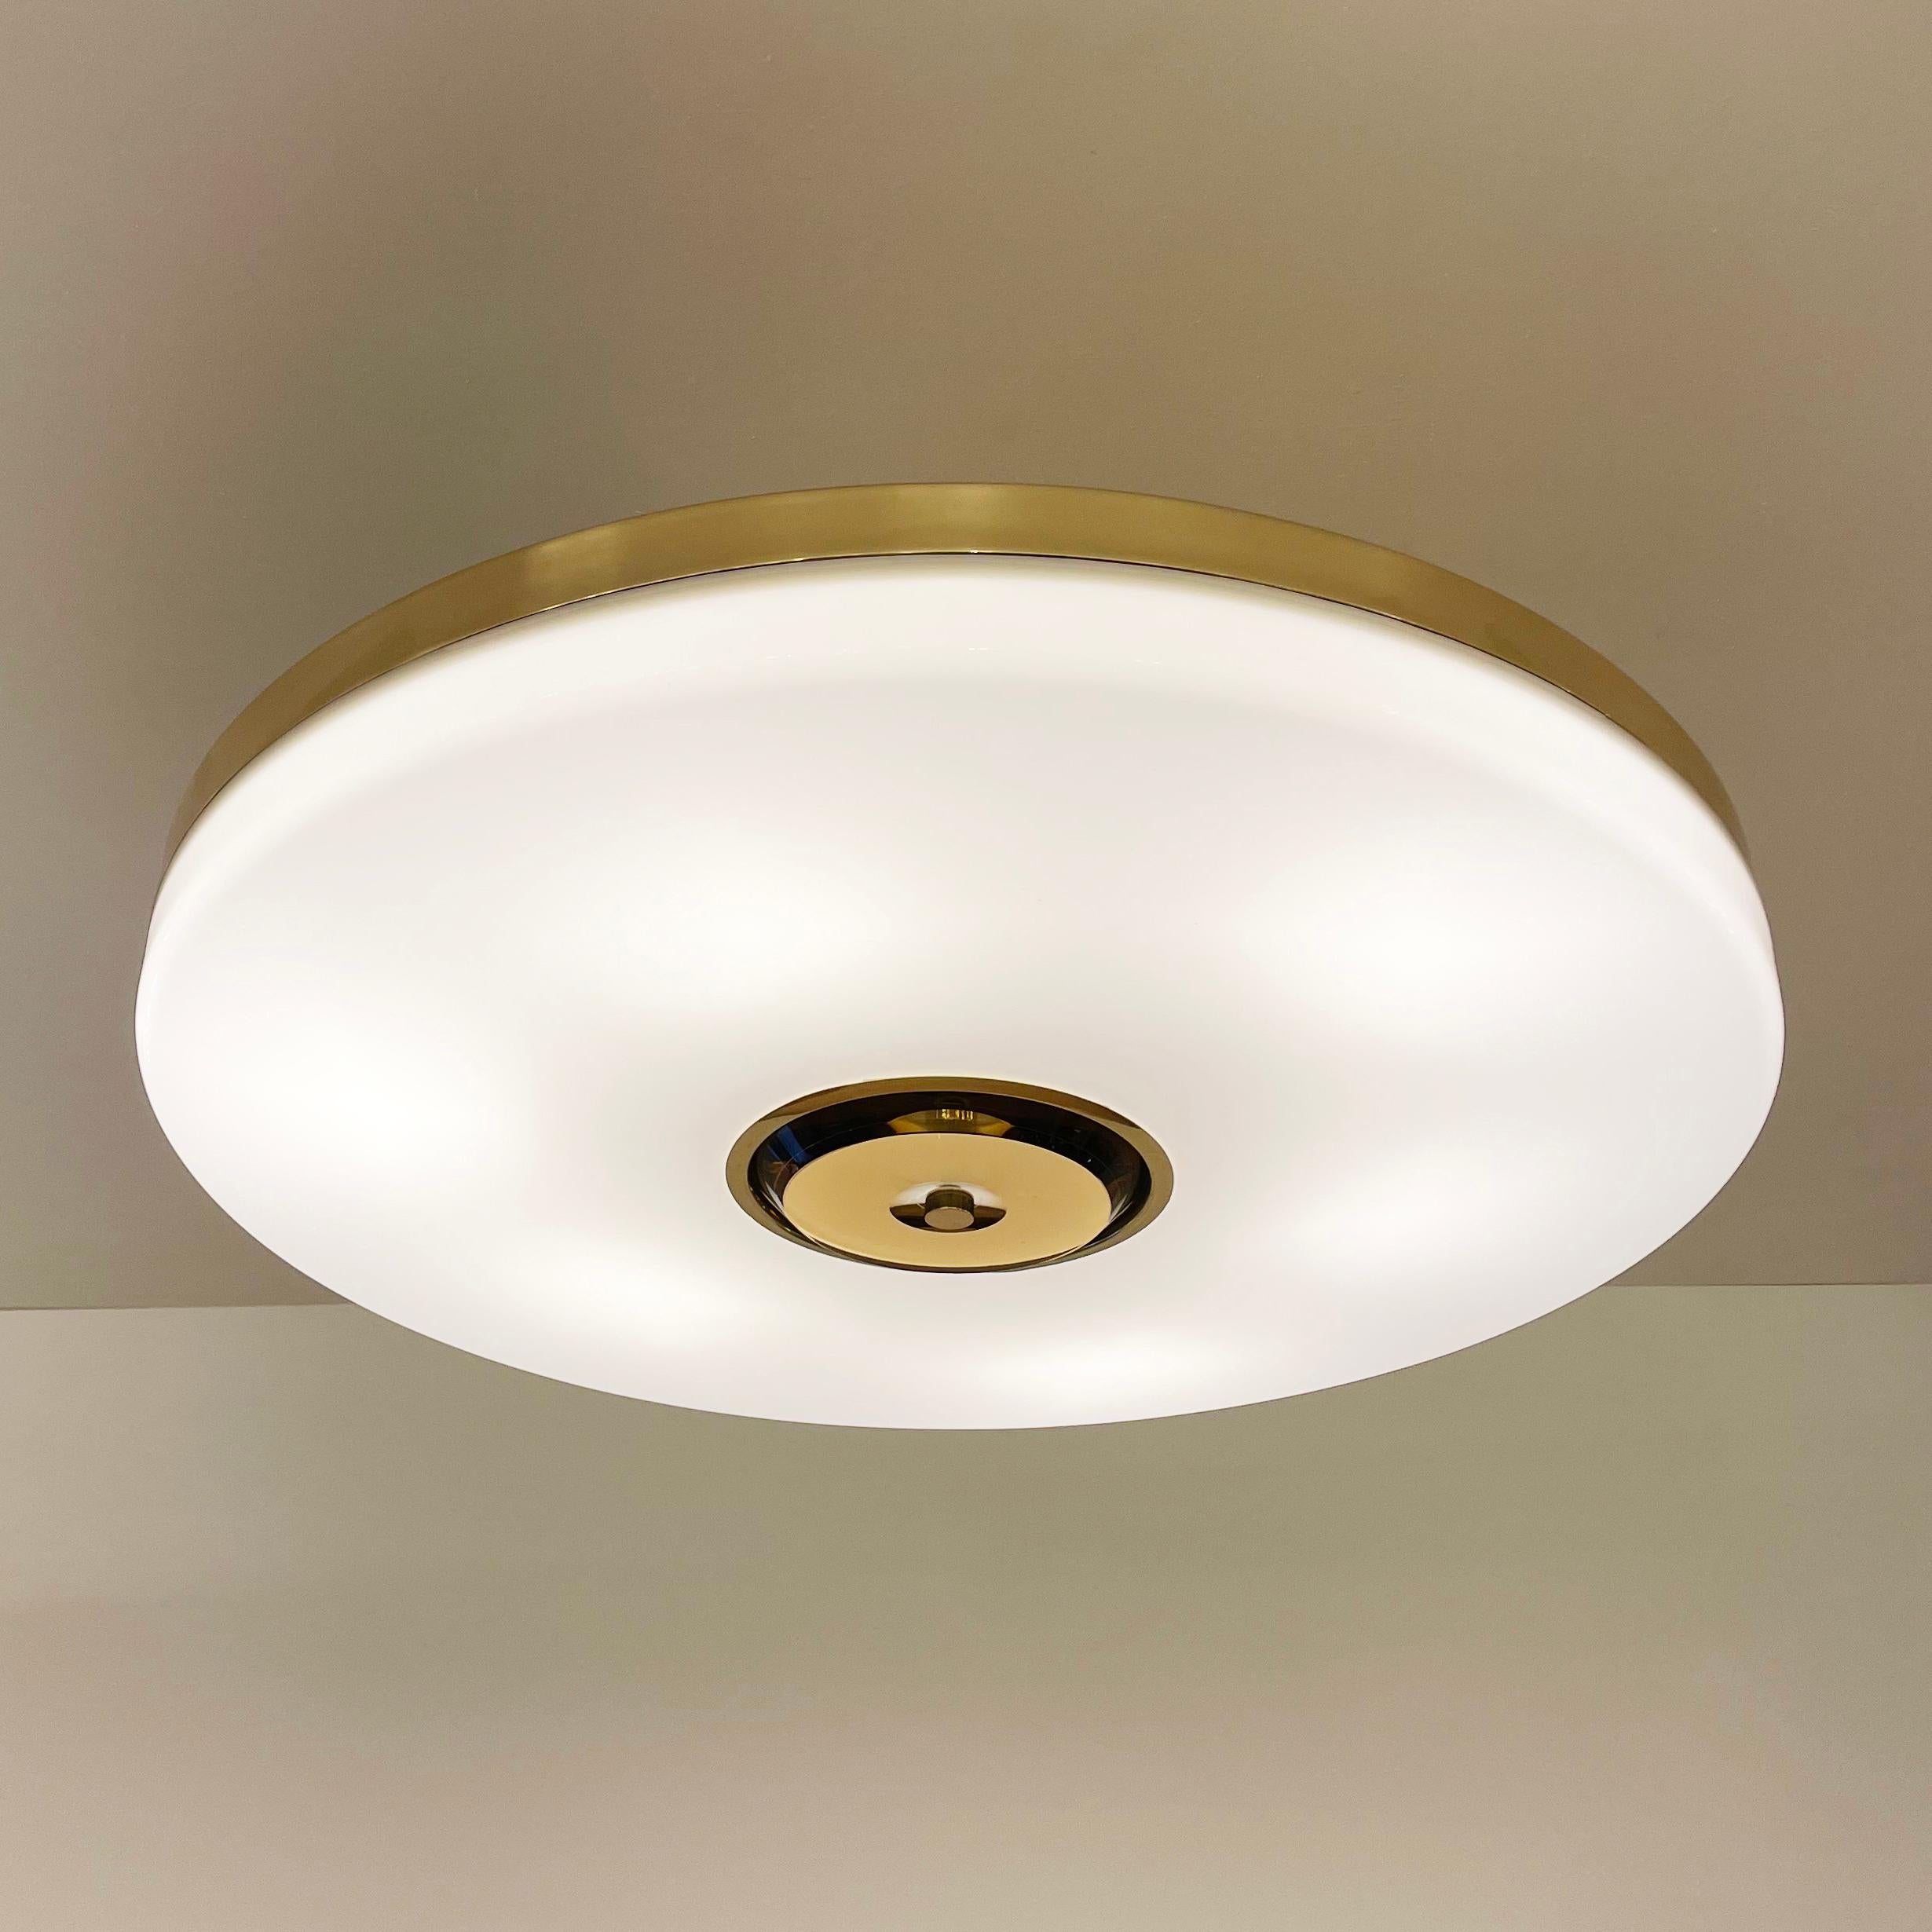 Iris Ceiling Light by Gaspare Asaro-Satin Brass Finish For Sale 1